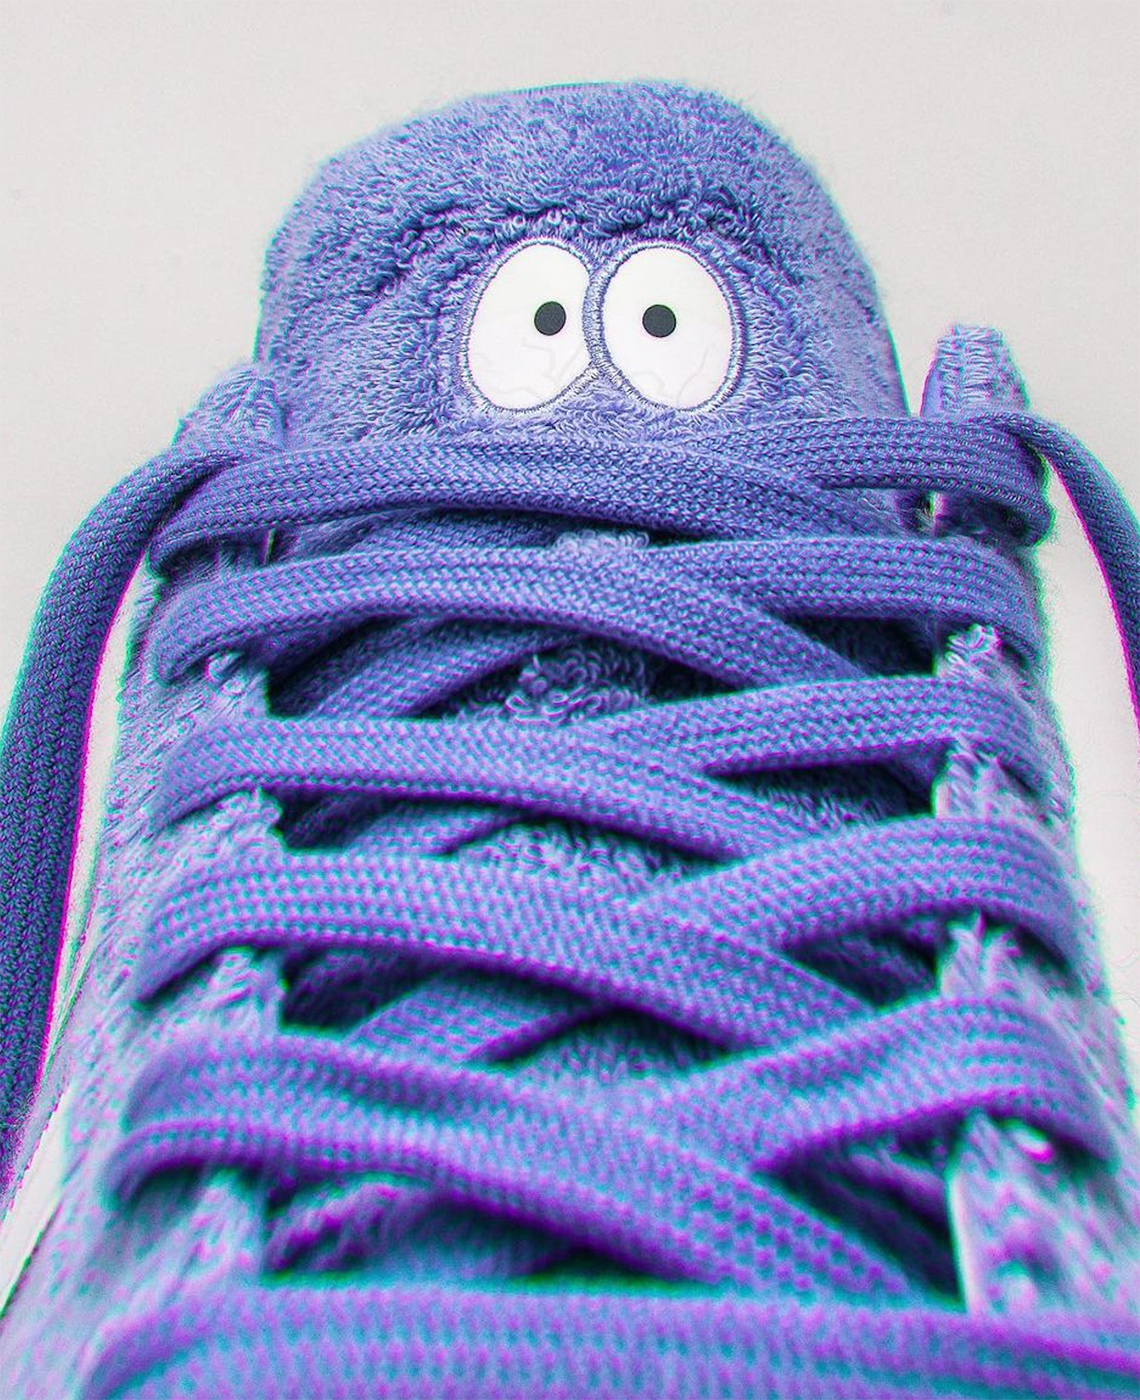 Towelie track adidas South Park Shoes Release Date 5